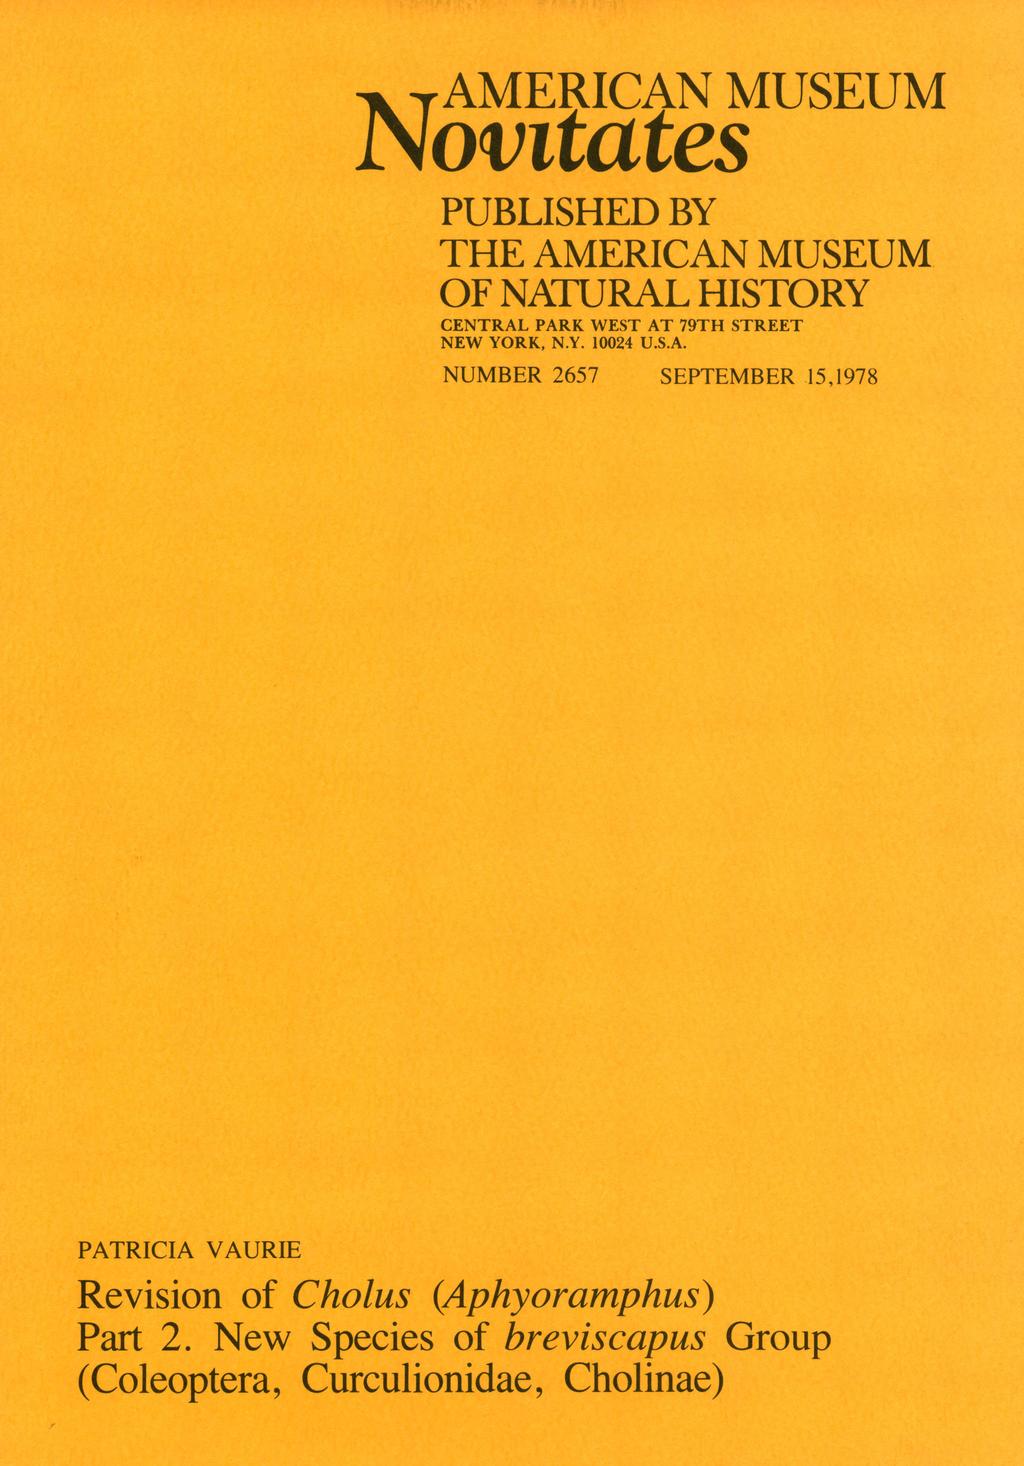 AMERICAN MUSEUM Novitates PUBLISHED BY THE AMERICAN MUSEUM OF NATURAL HISTORY CENTRAL PARK WEST AT 79TH STREET NEW YORK, N.Y. 10024 U.S.A. NUMBER 2657 SEPTEMBER 15,1978 PATRICIA VAURIE Revision of Cholus (Aphyoramphus) Part 2.